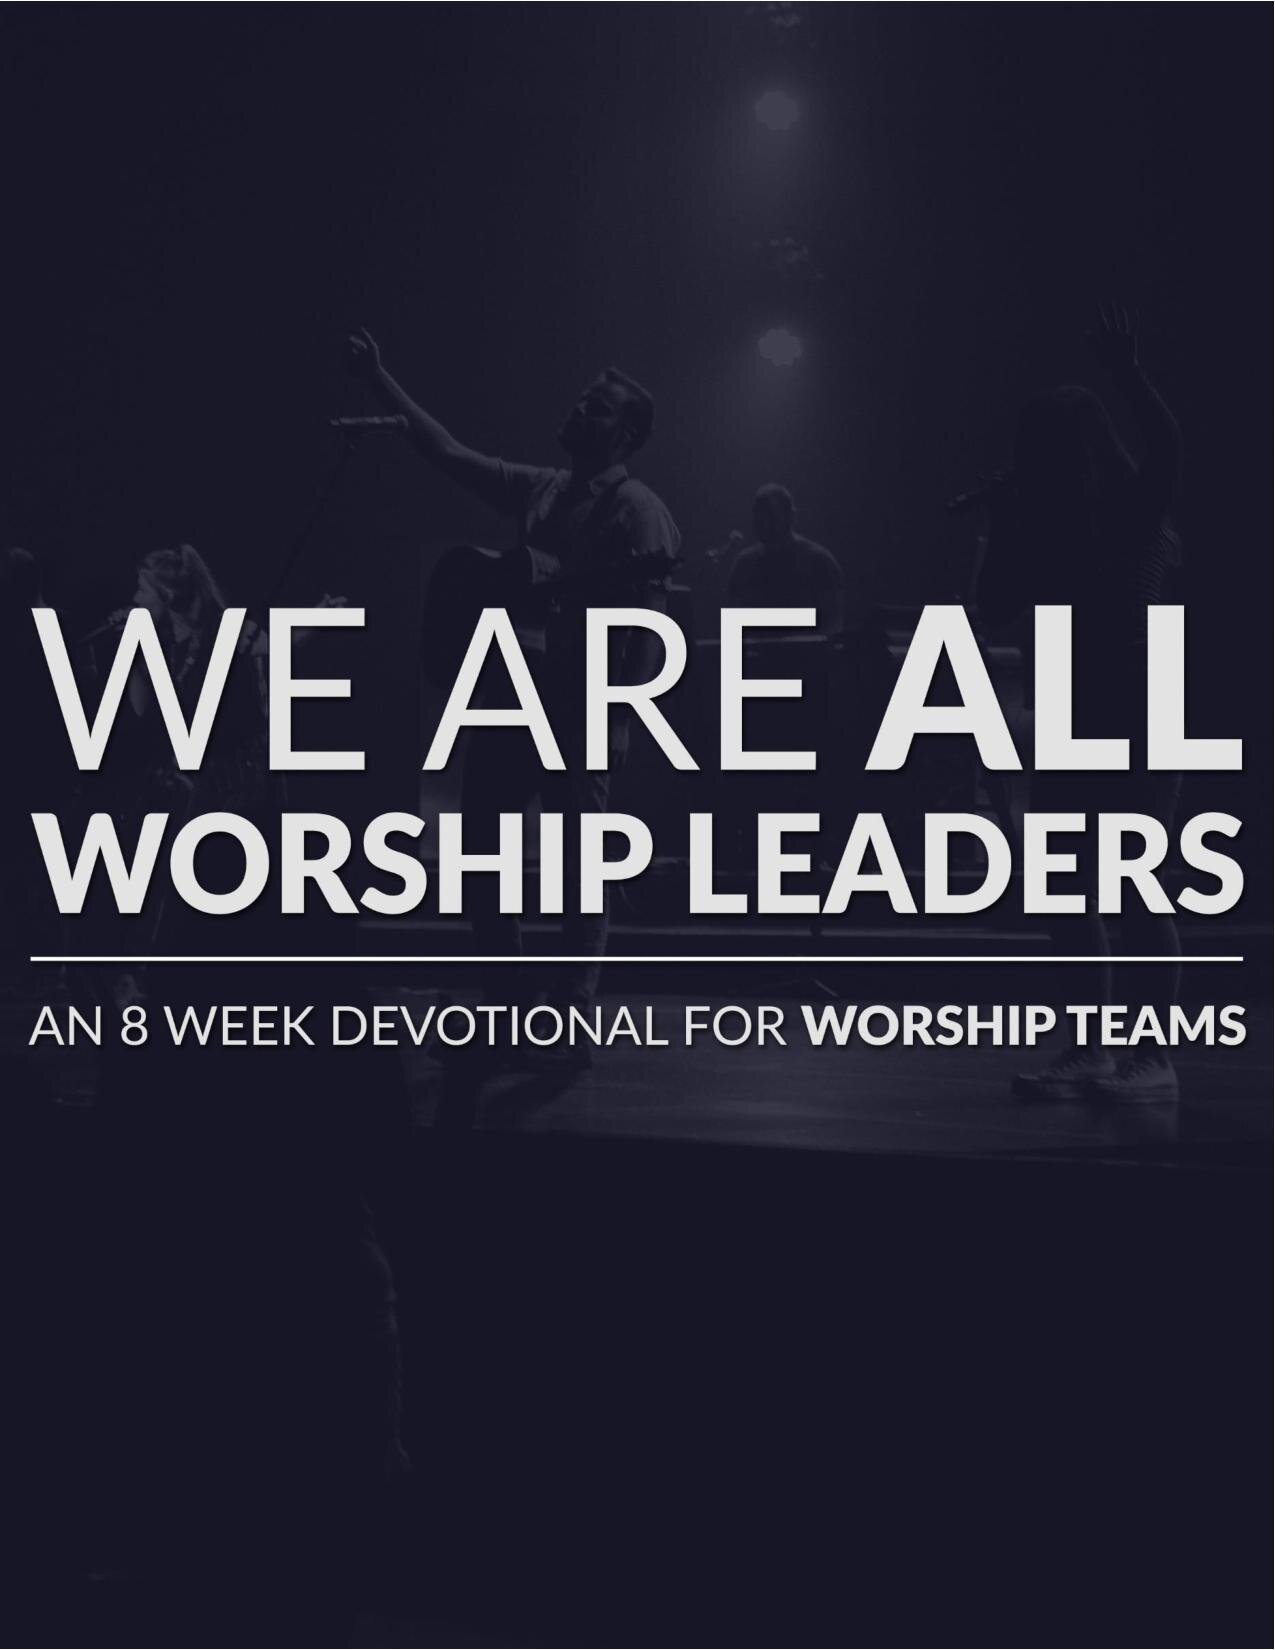 We Are All Worship Leaders - An 8 Week Devotional For Worship Teams-page-001.jpg